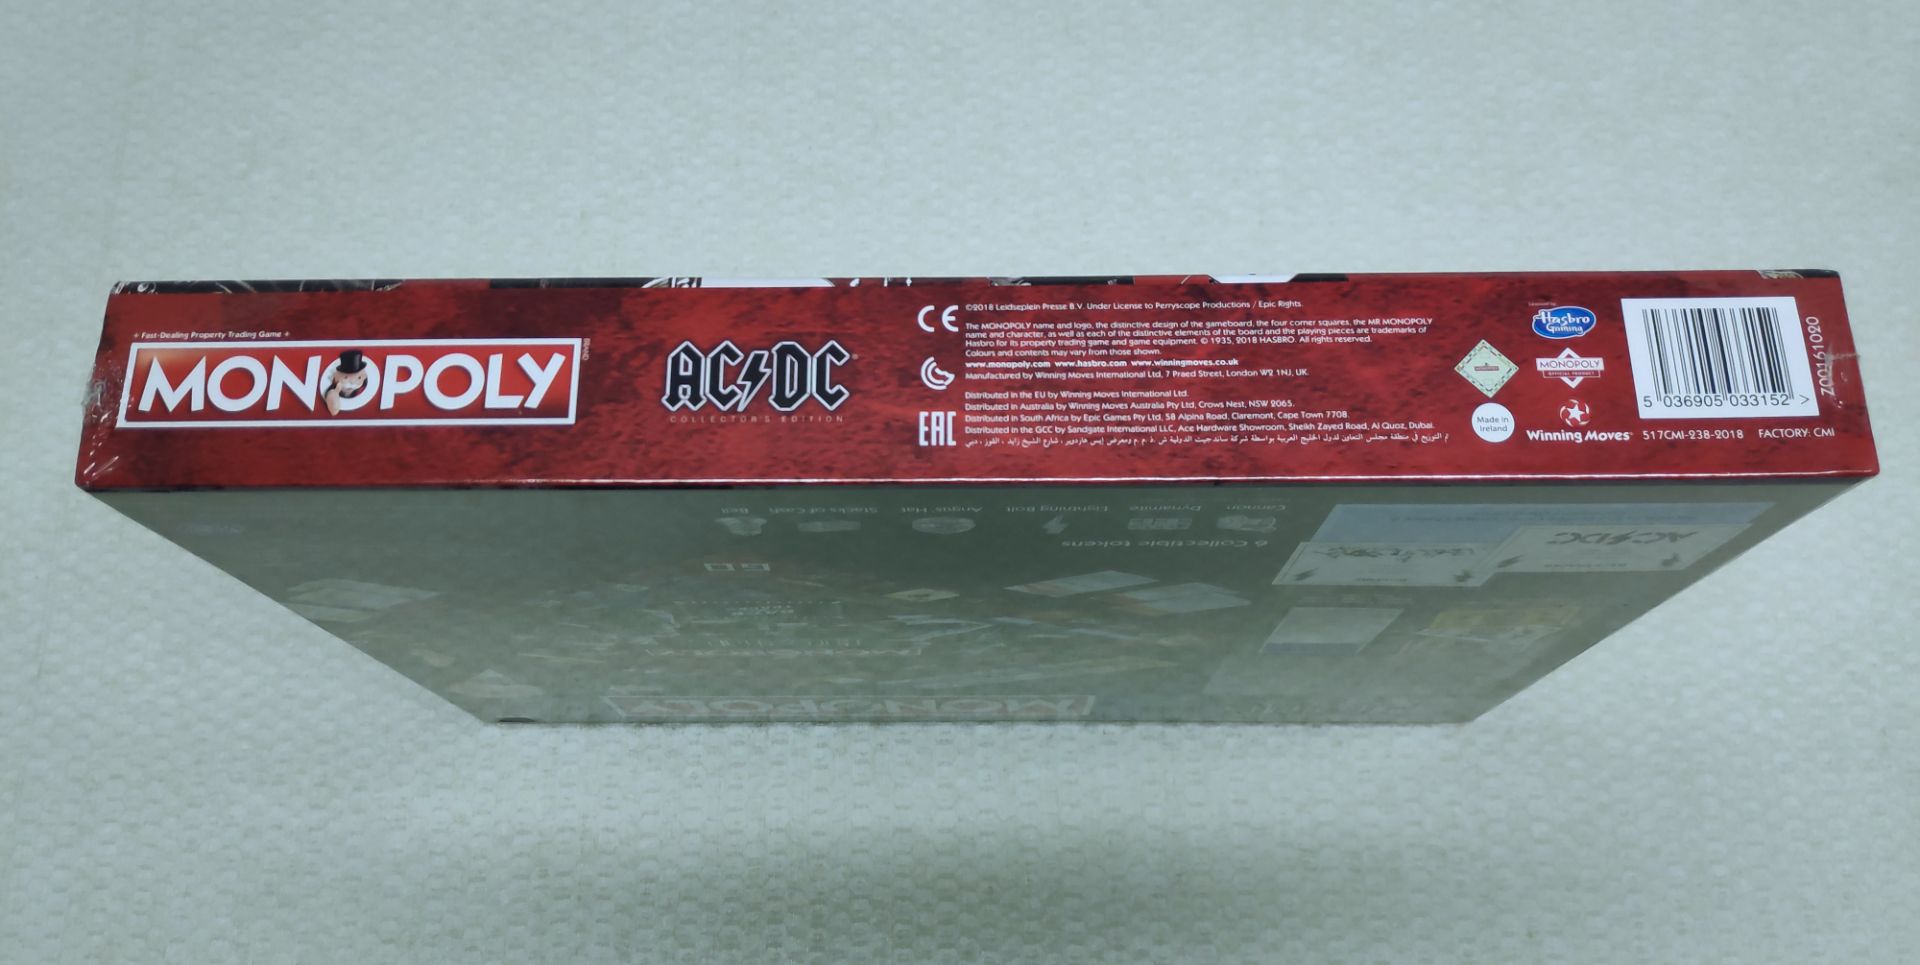 1 x AC/DC Collector's Edition Monopoly - New/Sealed - Image 2 of 8